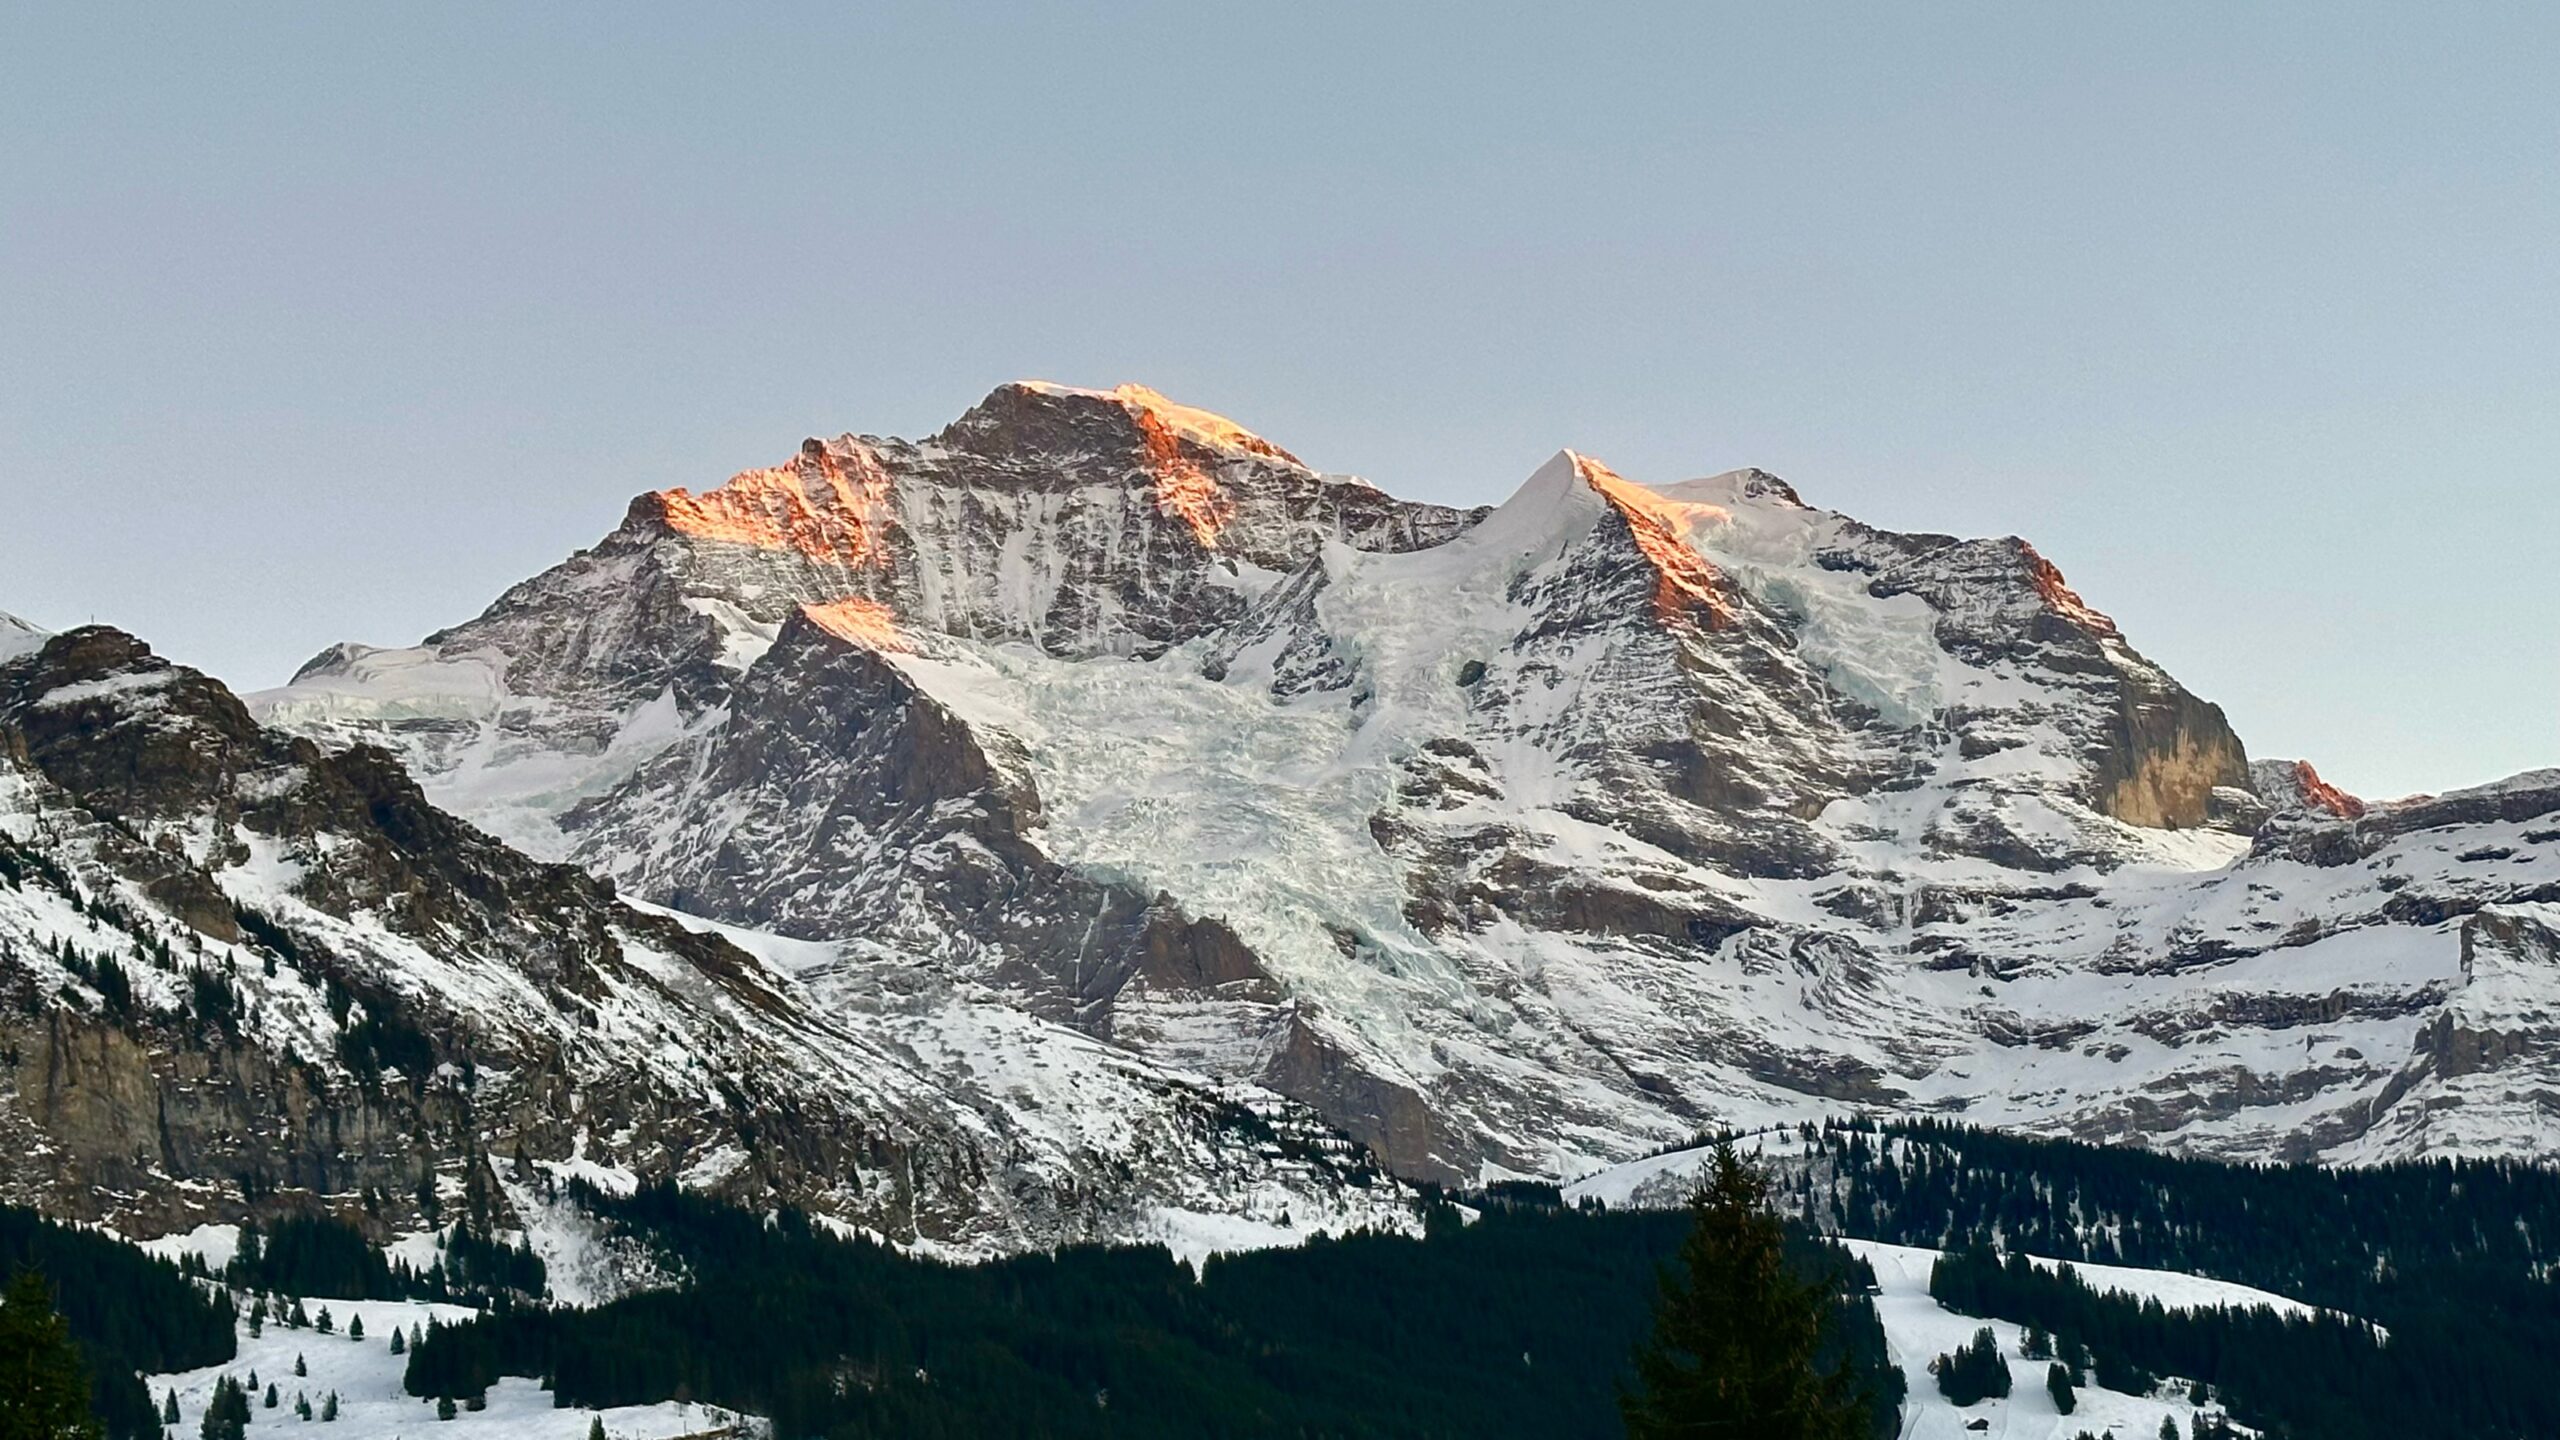 The Jungfrau, a rocky and snow peak in the Swiss Alps, with a few small peaks reflecting the rosy light of sunset.